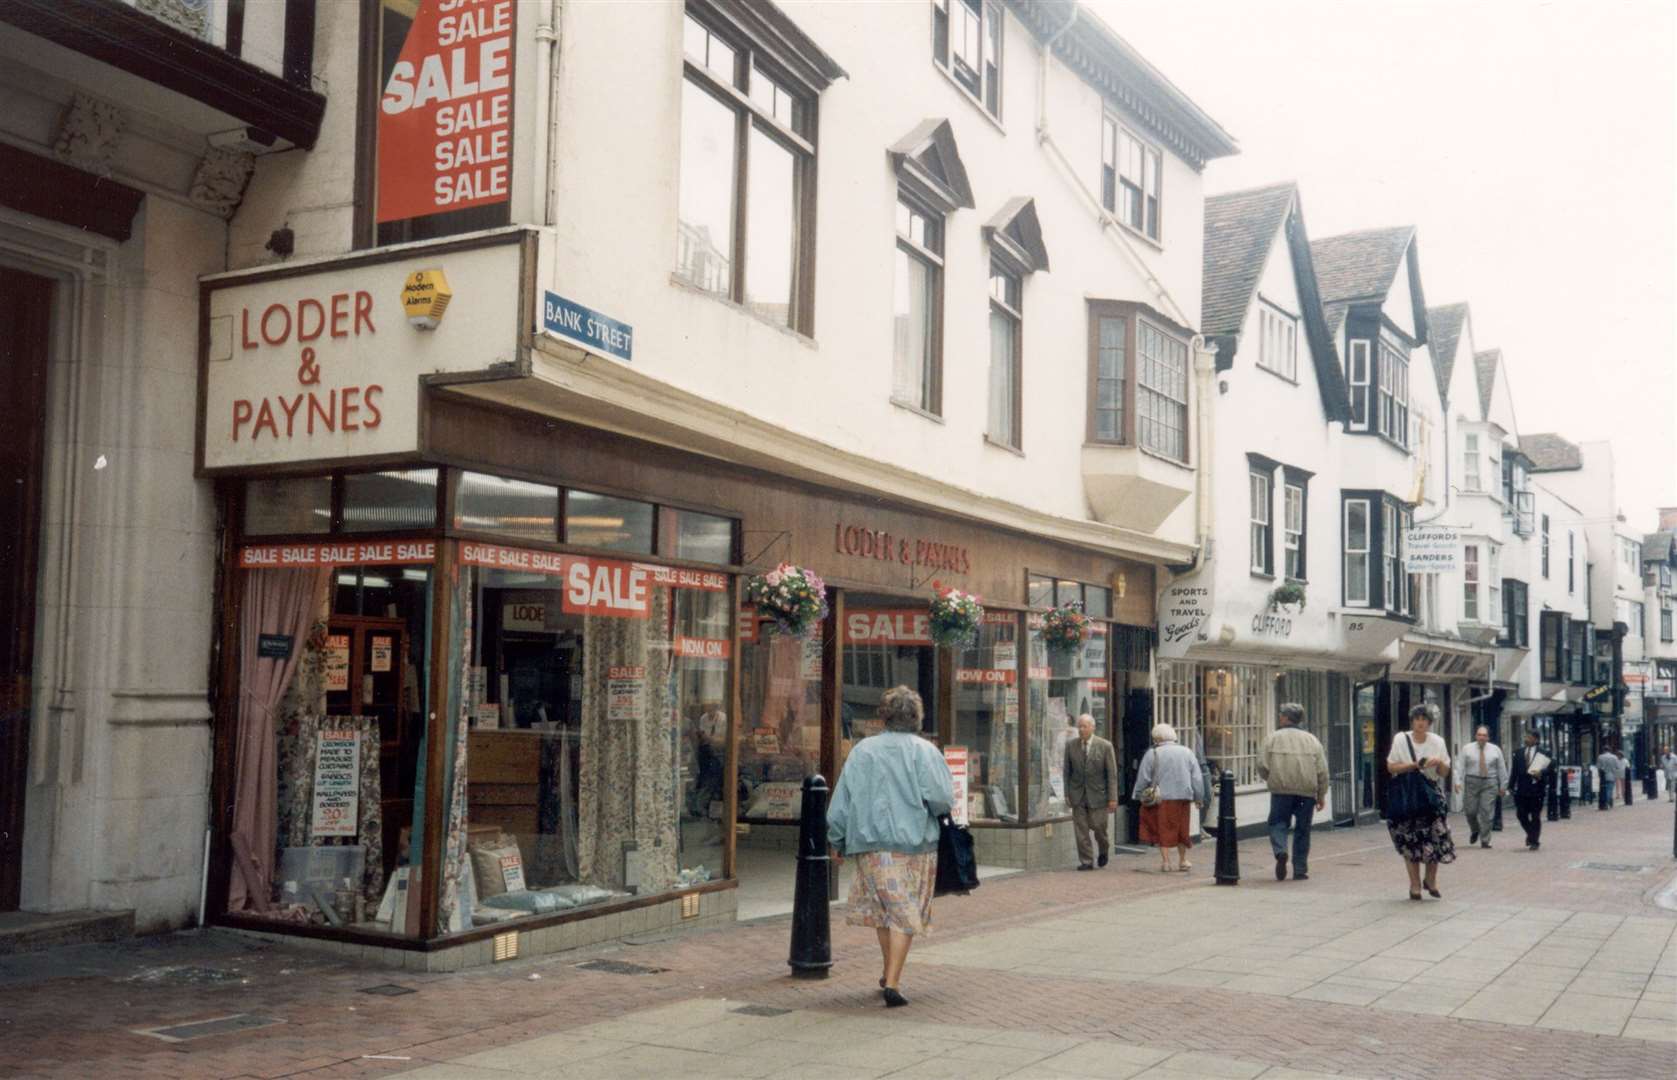 Bank Street, Maidstone, in 1996. The Loder & Paynes site was more recently occupied by Gallery nightclub